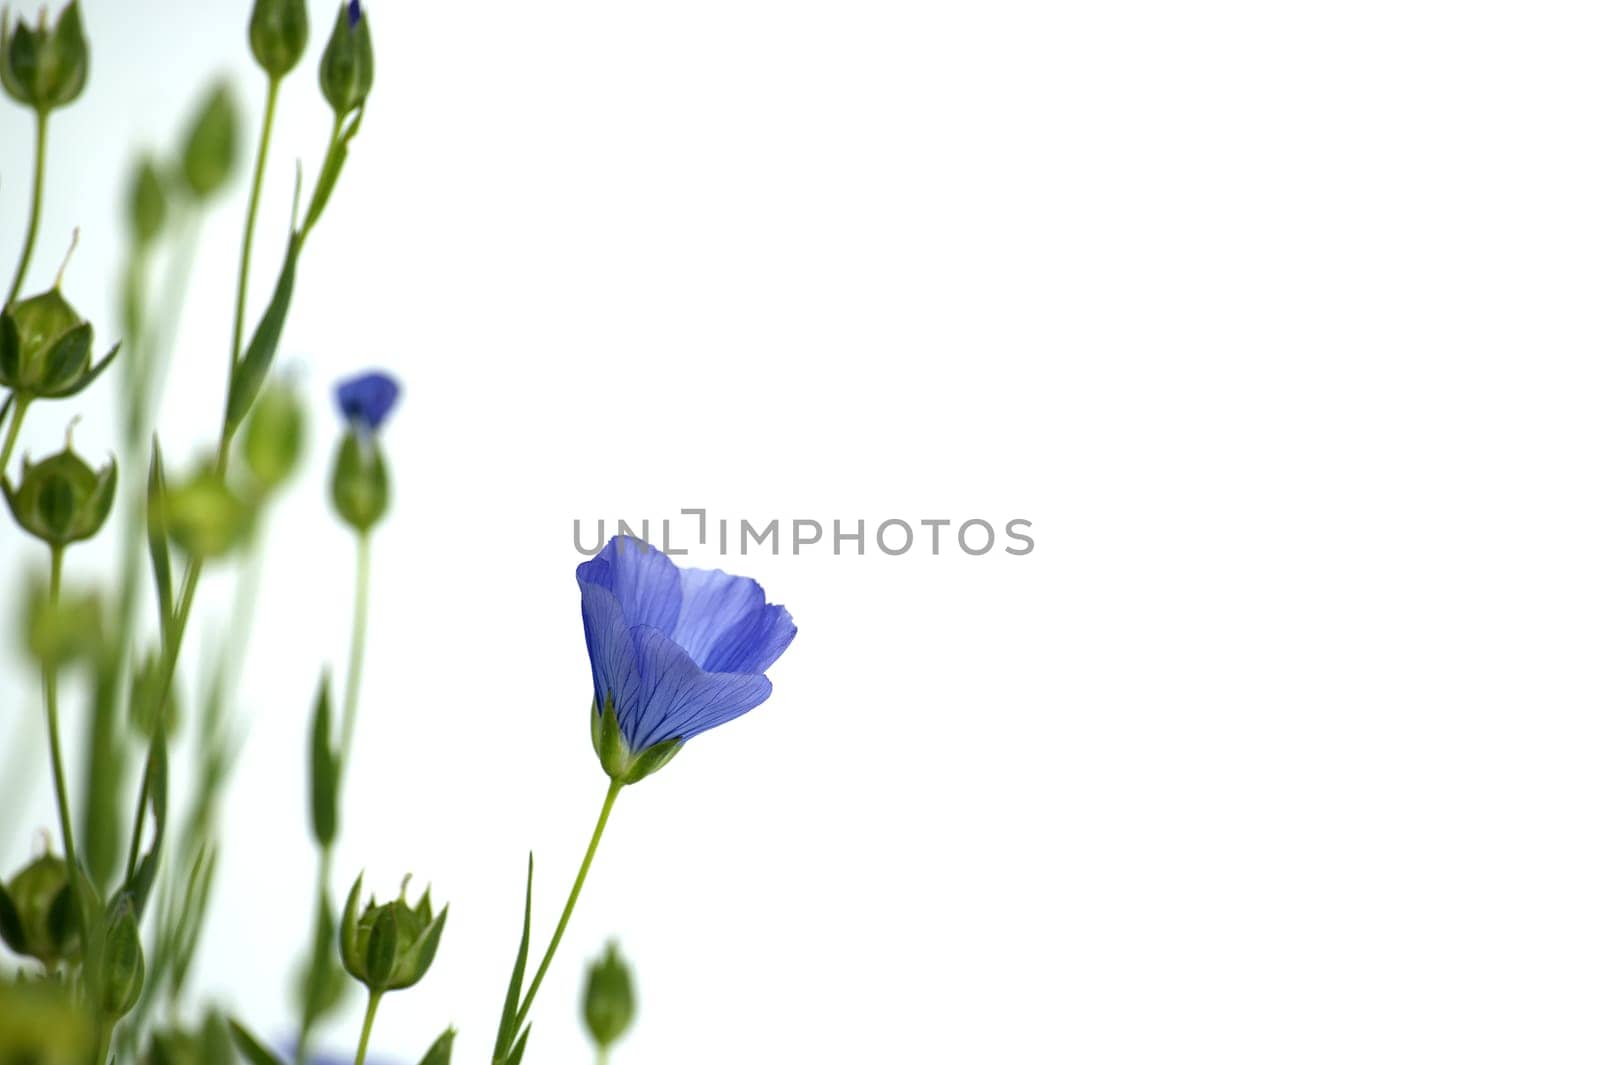 Flax (linseed) flower over isolated on white background by NetPix